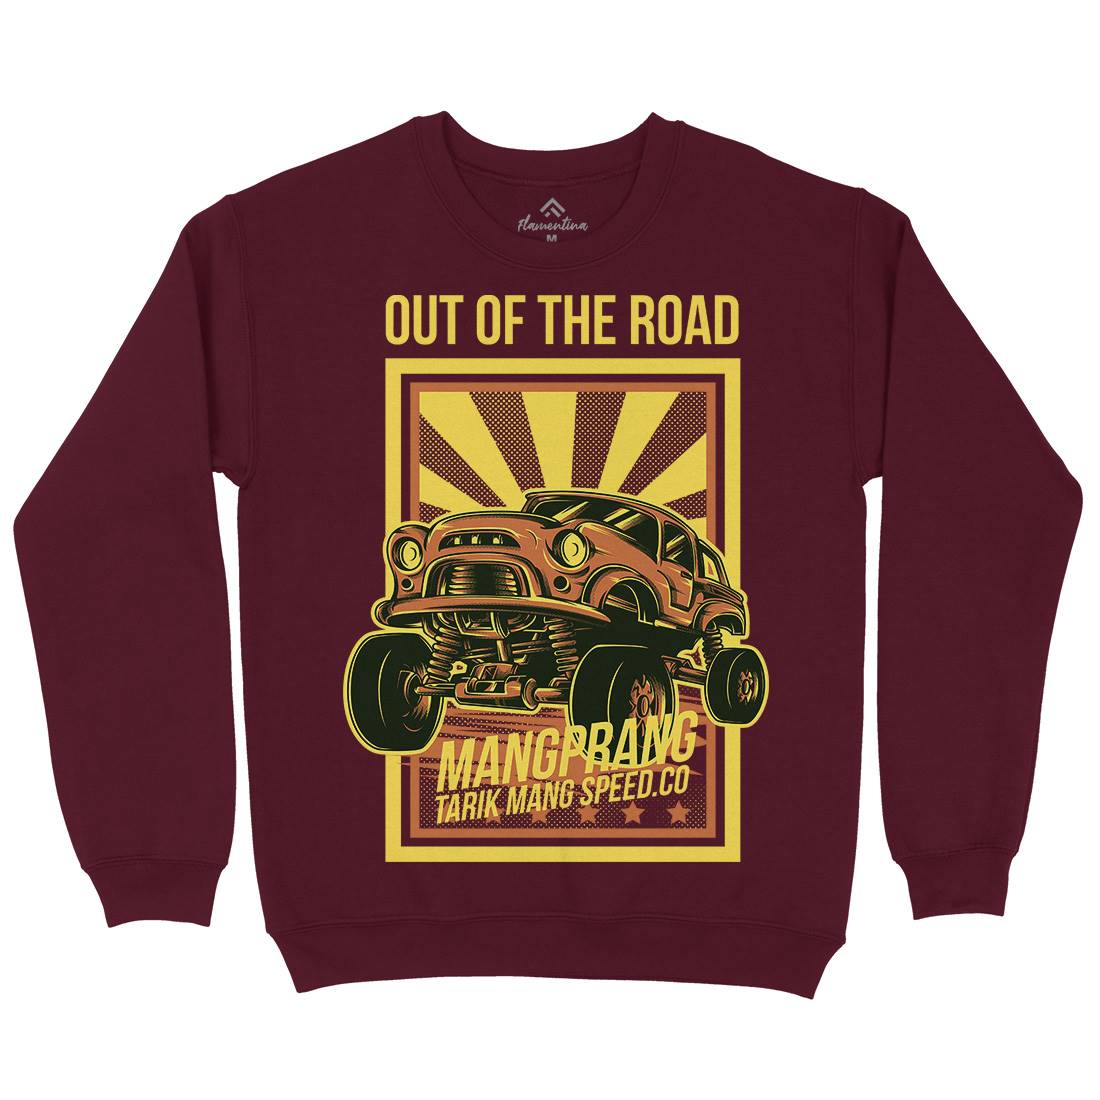 Out Of The Road Kids Crew Neck Sweatshirt Cars D674